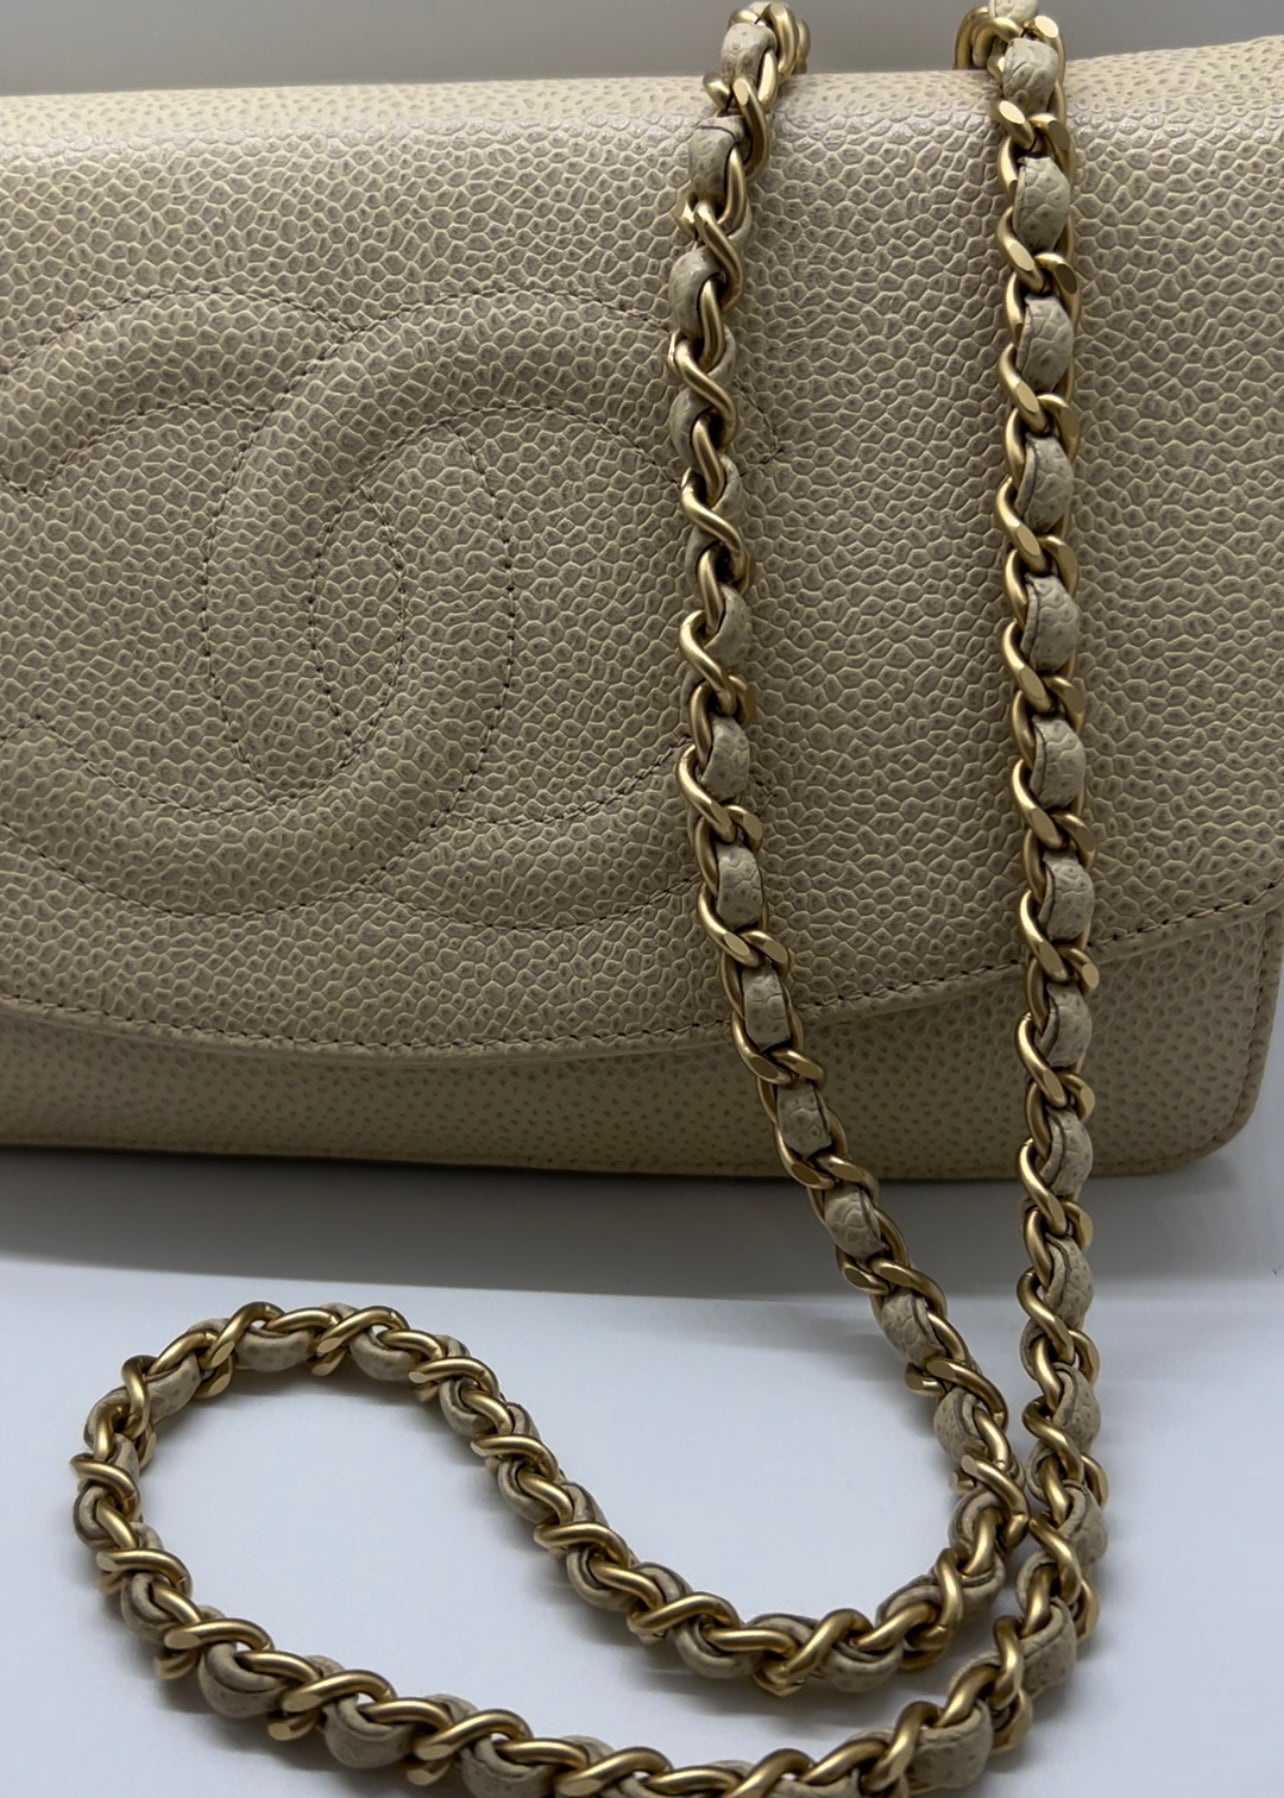 Chanel Timeless Vintage Wallet On A Chain – My Best Friend's